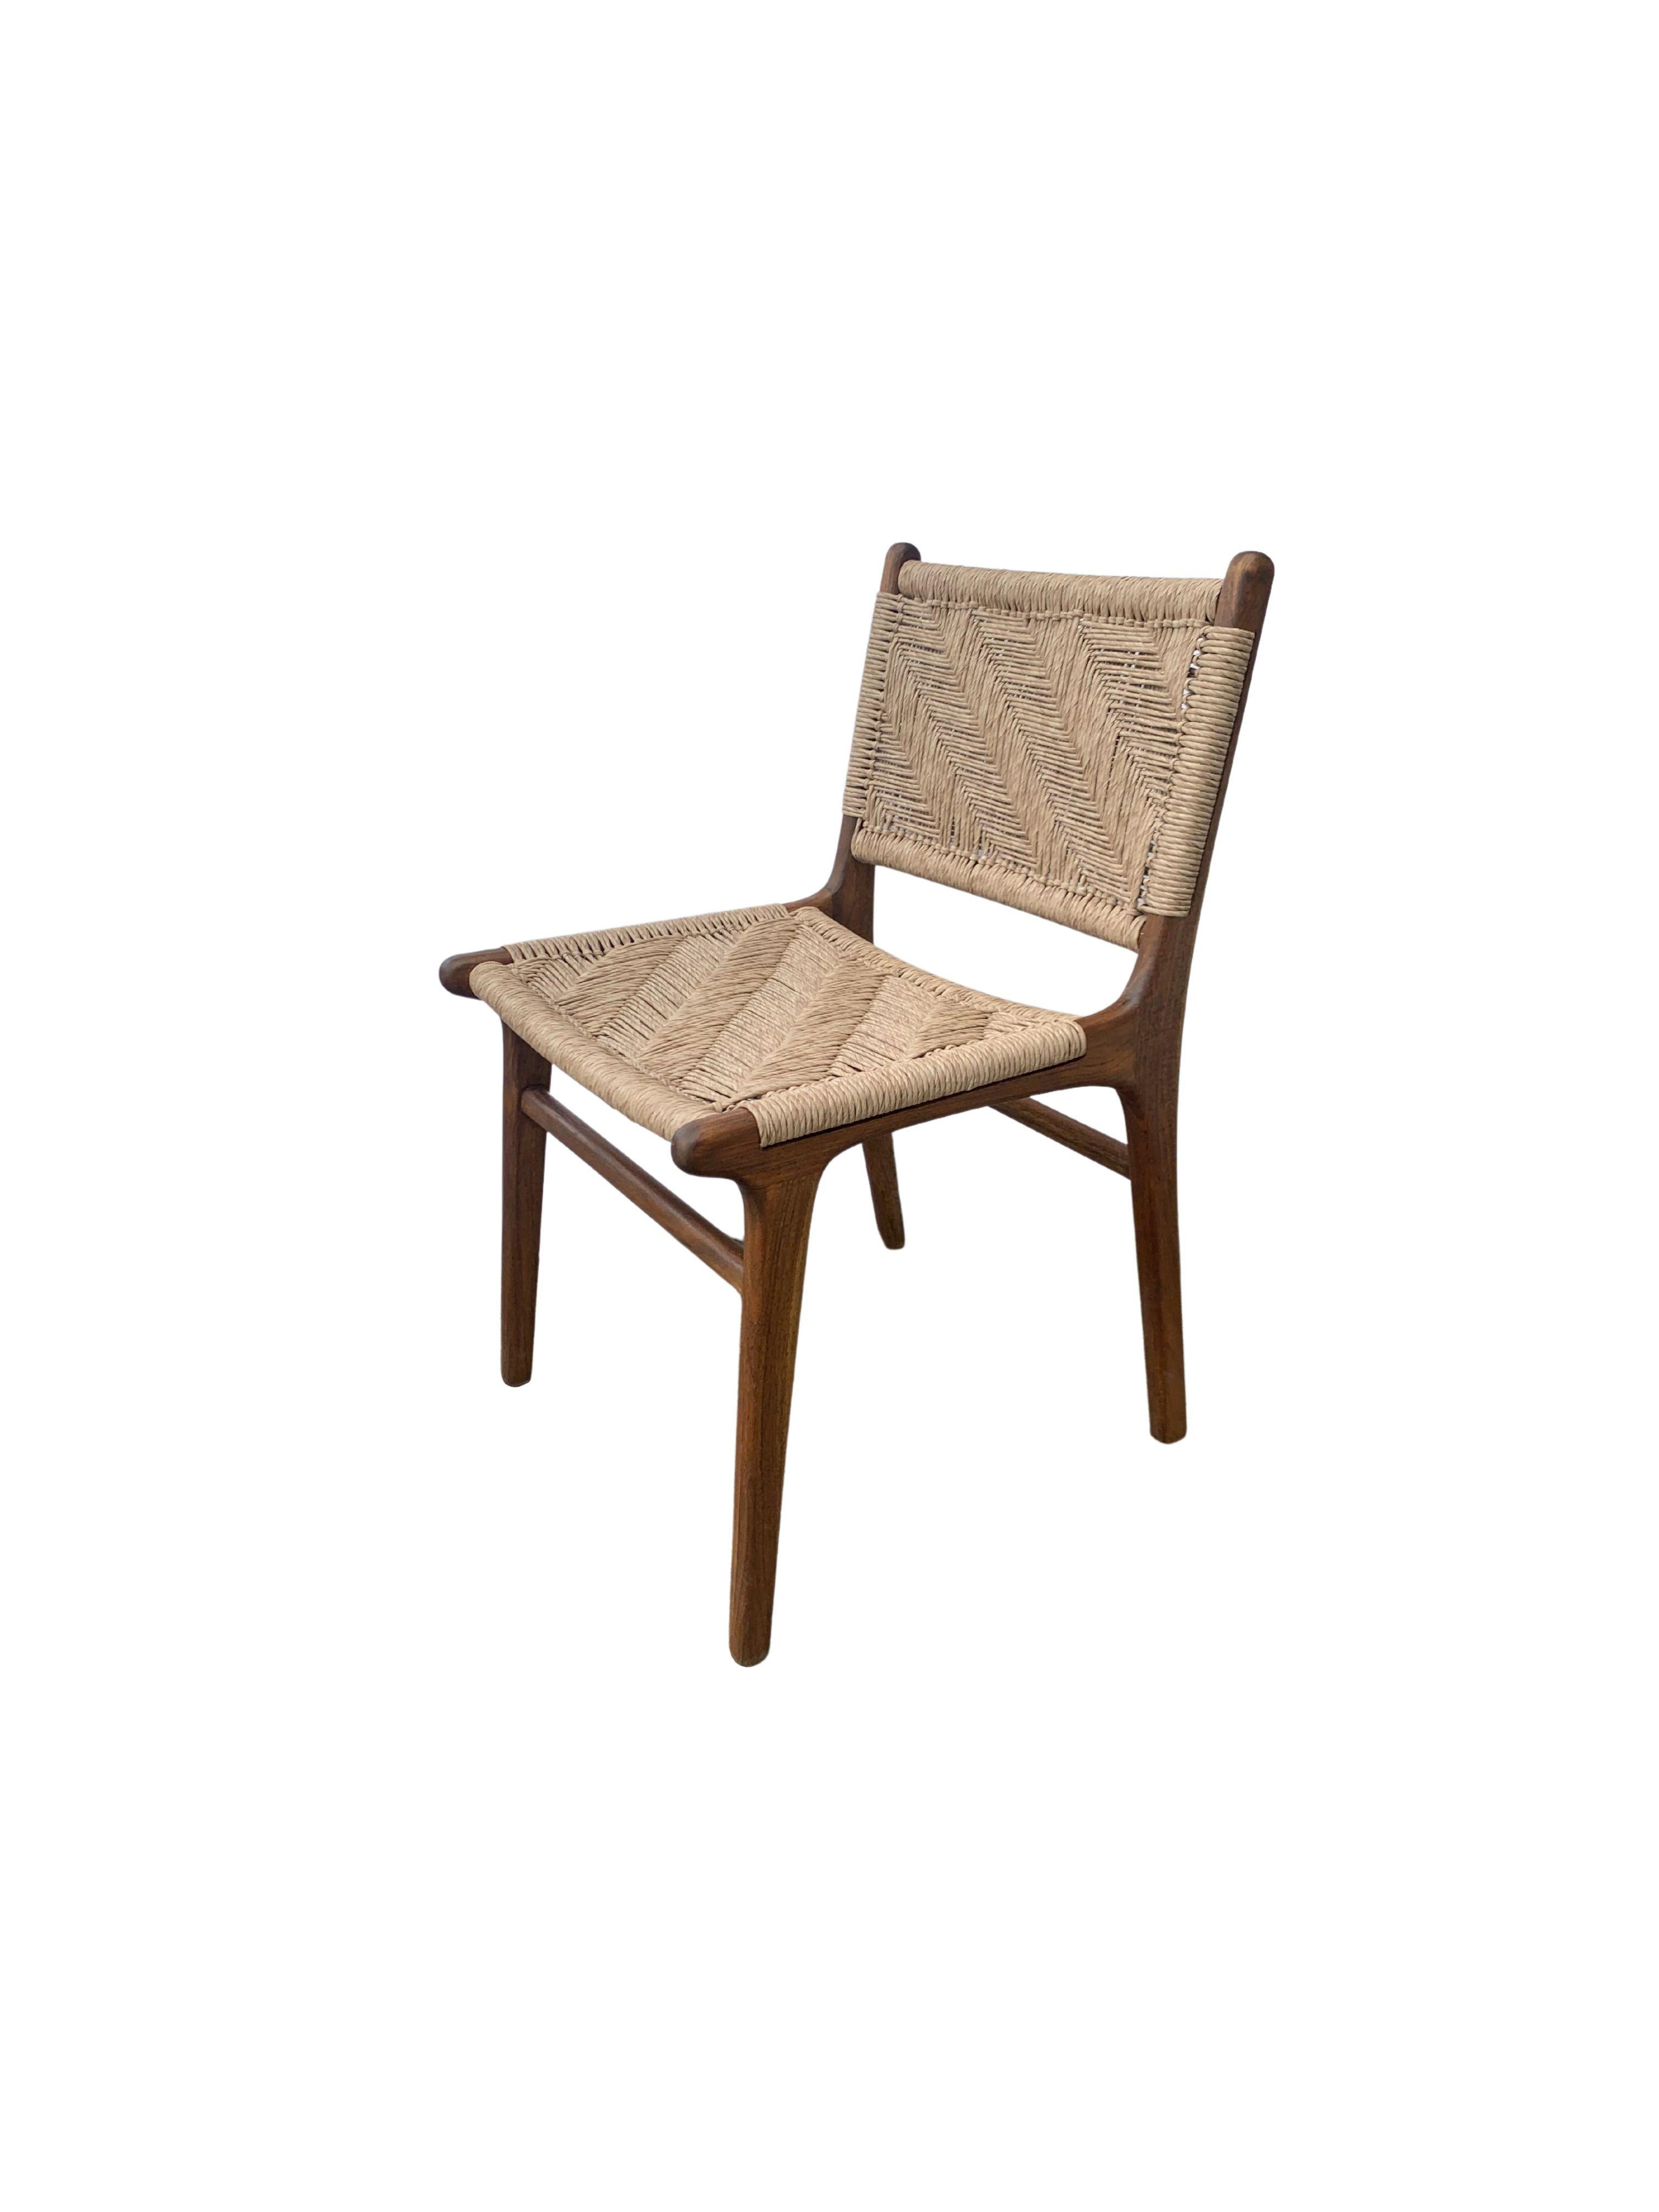 Indonesian Teak Wood Framed Chair with Woven Synthetic Rattan Seat, Dark Wood Finish